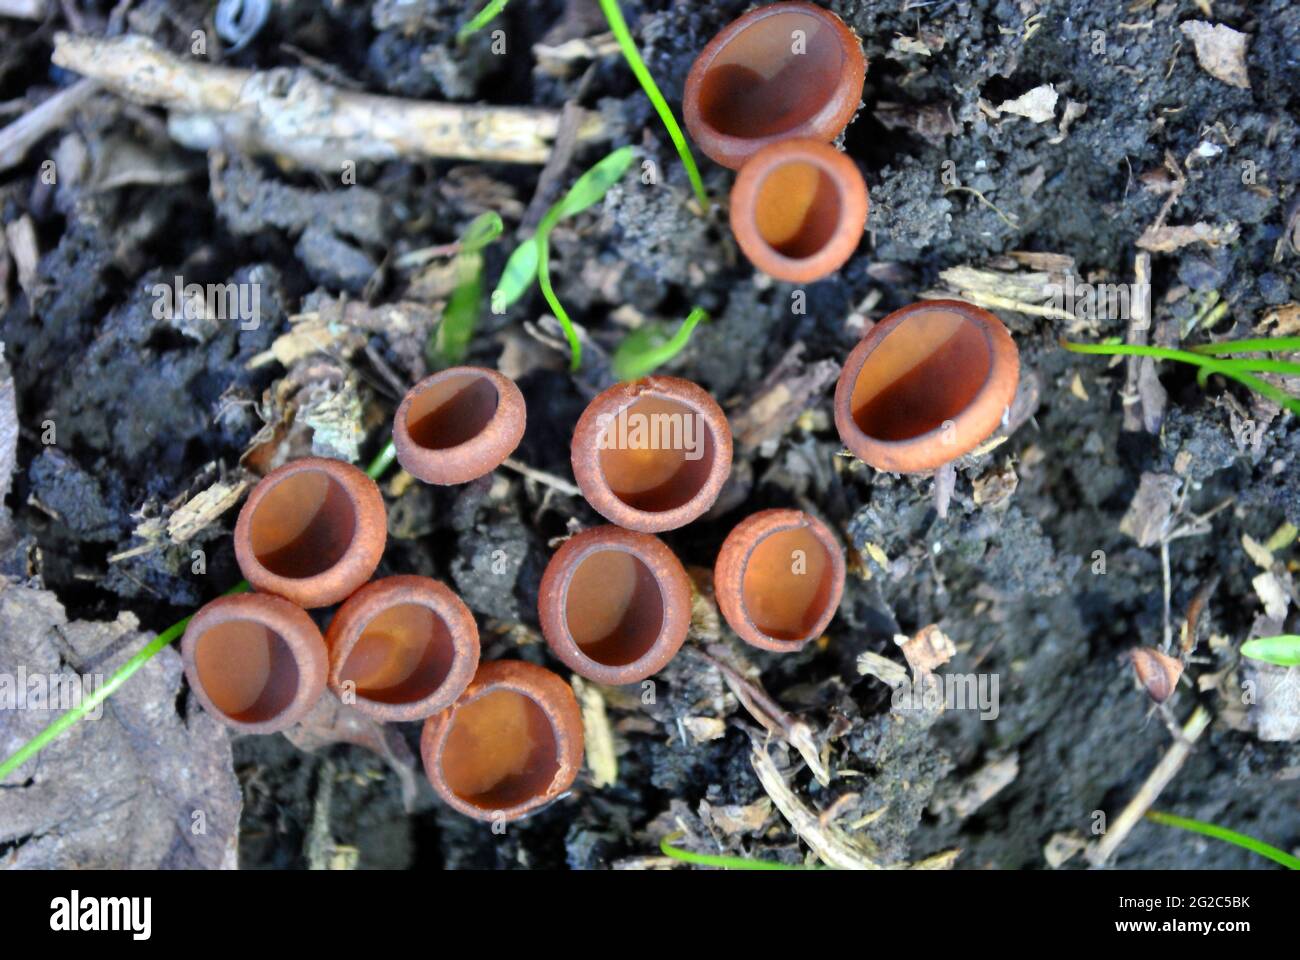 Sarcoscypha coccinea (scarlet elf cup or the scarlet cup) growing in wet soil, top view Stock Photo